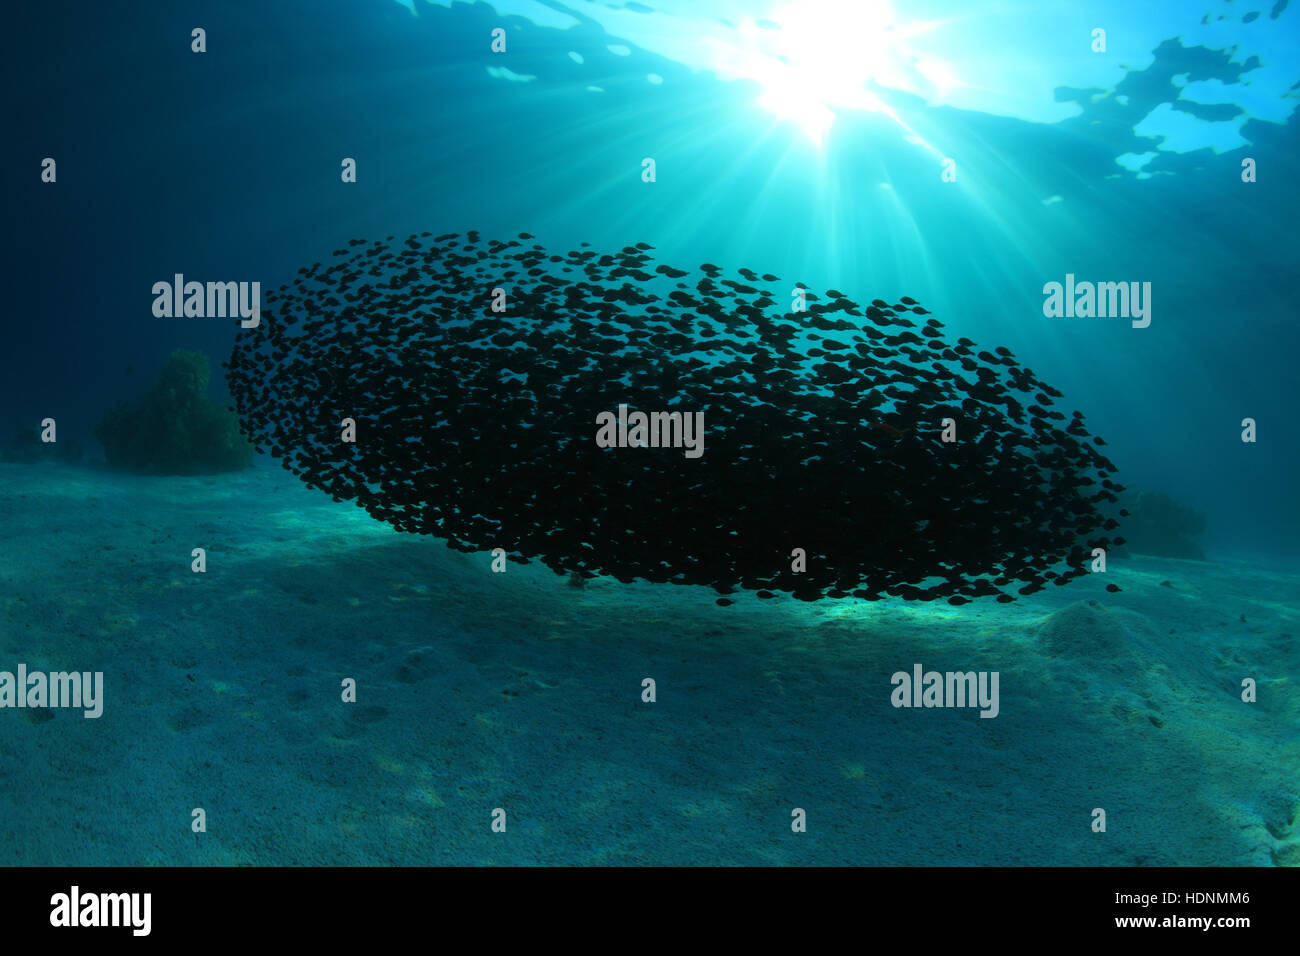 Shoal of black surgeonfish in the tropical coral reef Stock Photo